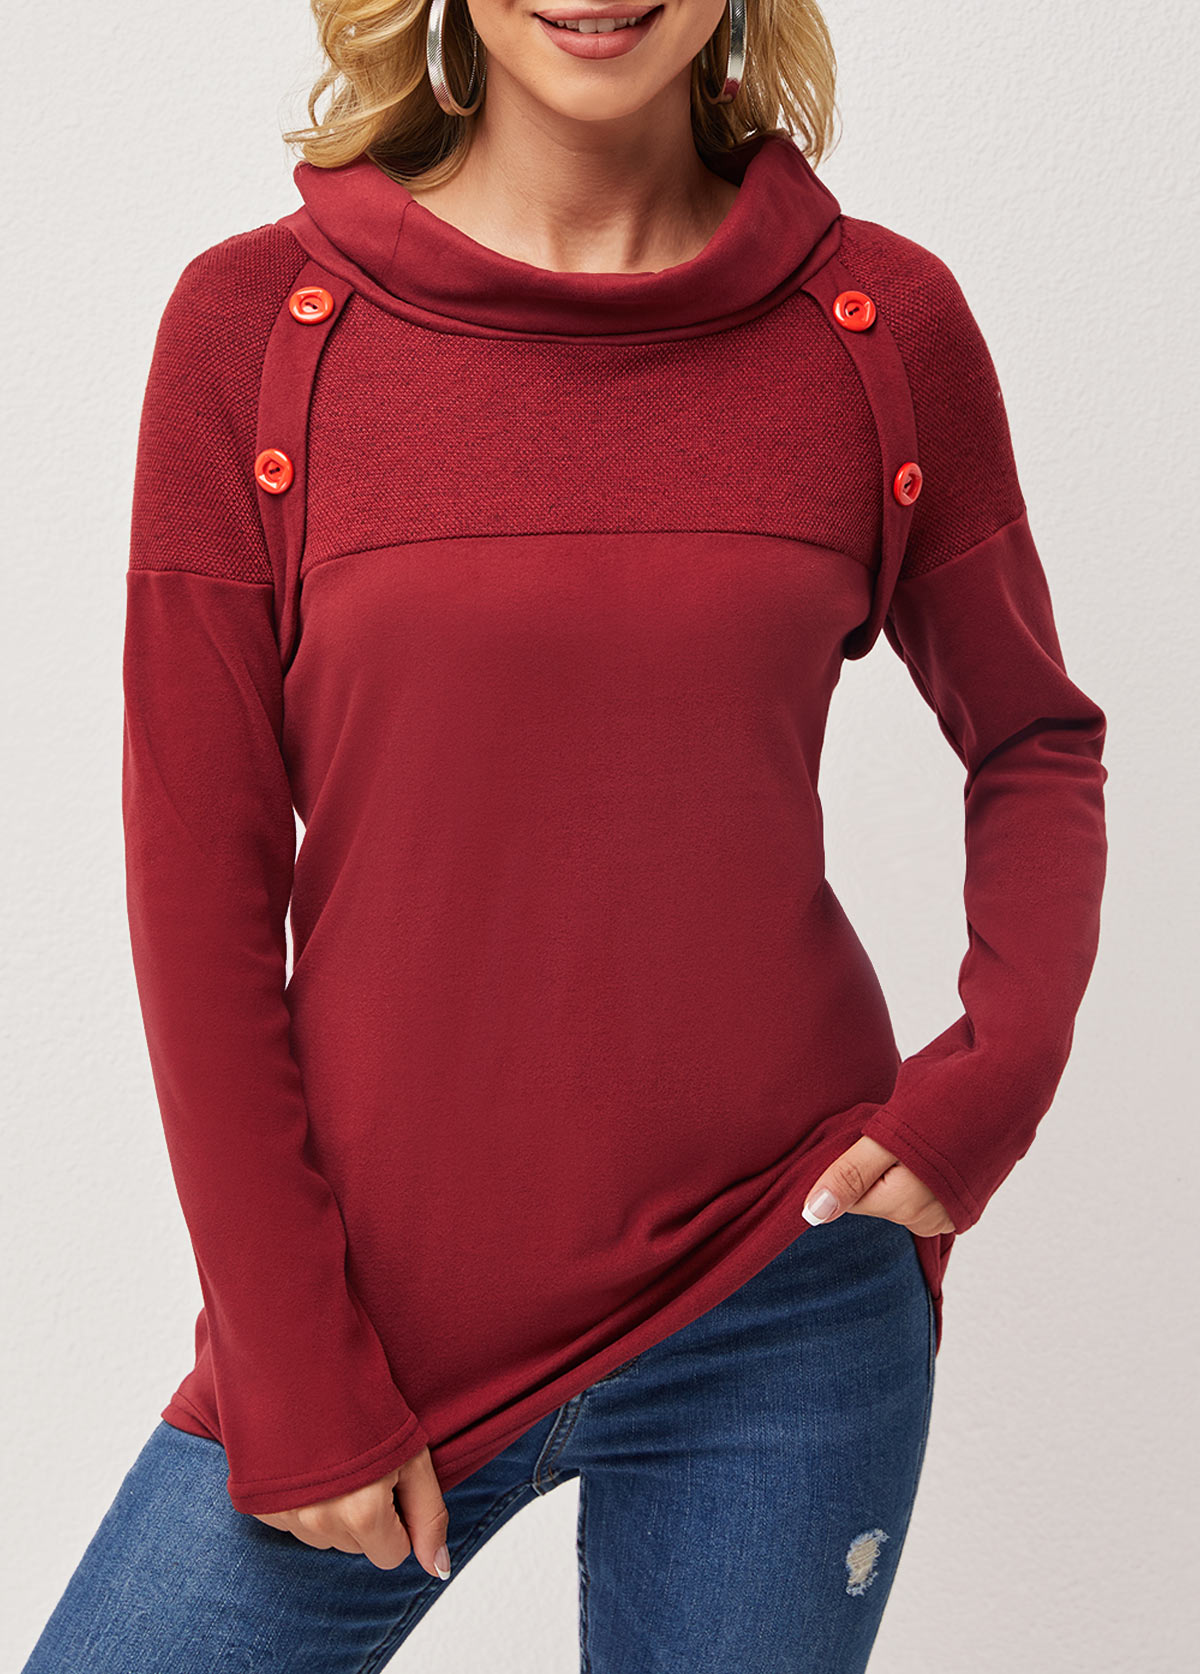 Wine Red Decorative Button Cowl Neck T Shirt